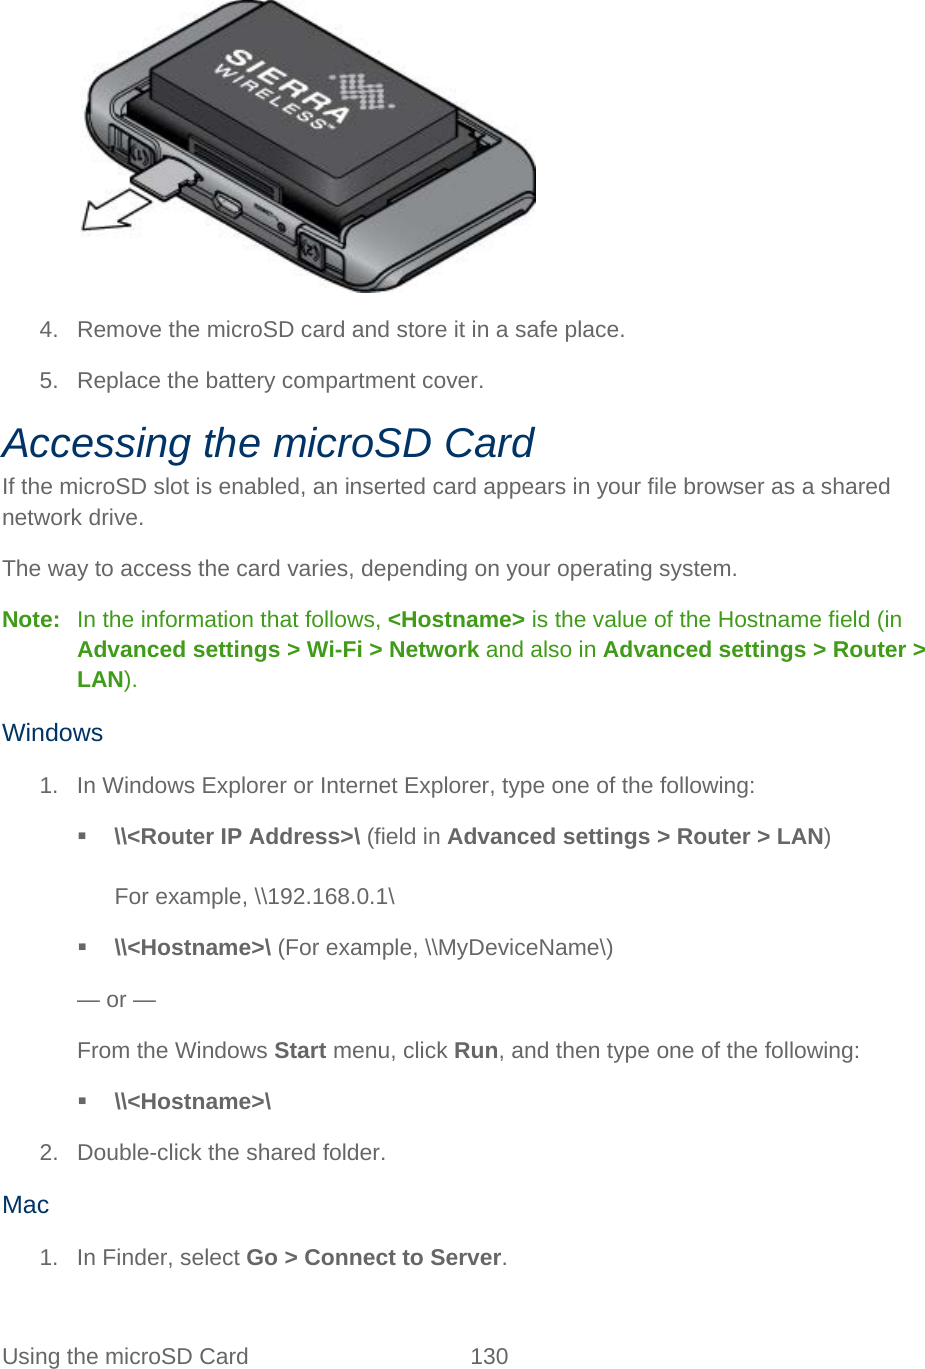 Using the microSD Card 130     4. Remove the microSD card and store it in a safe place. 5. Replace the battery compartment cover. Accessing the microSD Card If the microSD slot is enabled, an inserted card appears in your file browser as a shared network drive. The way to access the card varies, depending on your operating system. Note:   In the information that follows, &lt;Hostname&gt; is the value of the Hostname field (in Advanced settings &gt; Wi-Fi &gt; Network and also in Advanced settings &gt; Router &gt; LAN). Windows 1. In Windows Explorer or Internet Explorer, type one of the following:  \\&lt;Router IP Address&gt;\ (field in Advanced settings &gt; Router &gt; LAN)  For example, \\192.168.0.1\  \\&lt;Hostname&gt;\ (For example, \\MyDeviceName\) — or — From the Windows Start menu, click Run, and then type one of the following:  \\&lt;Hostname&gt;\ 2. Double-click the shared folder. Mac 1. In Finder, select Go &gt; Connect to Server. 